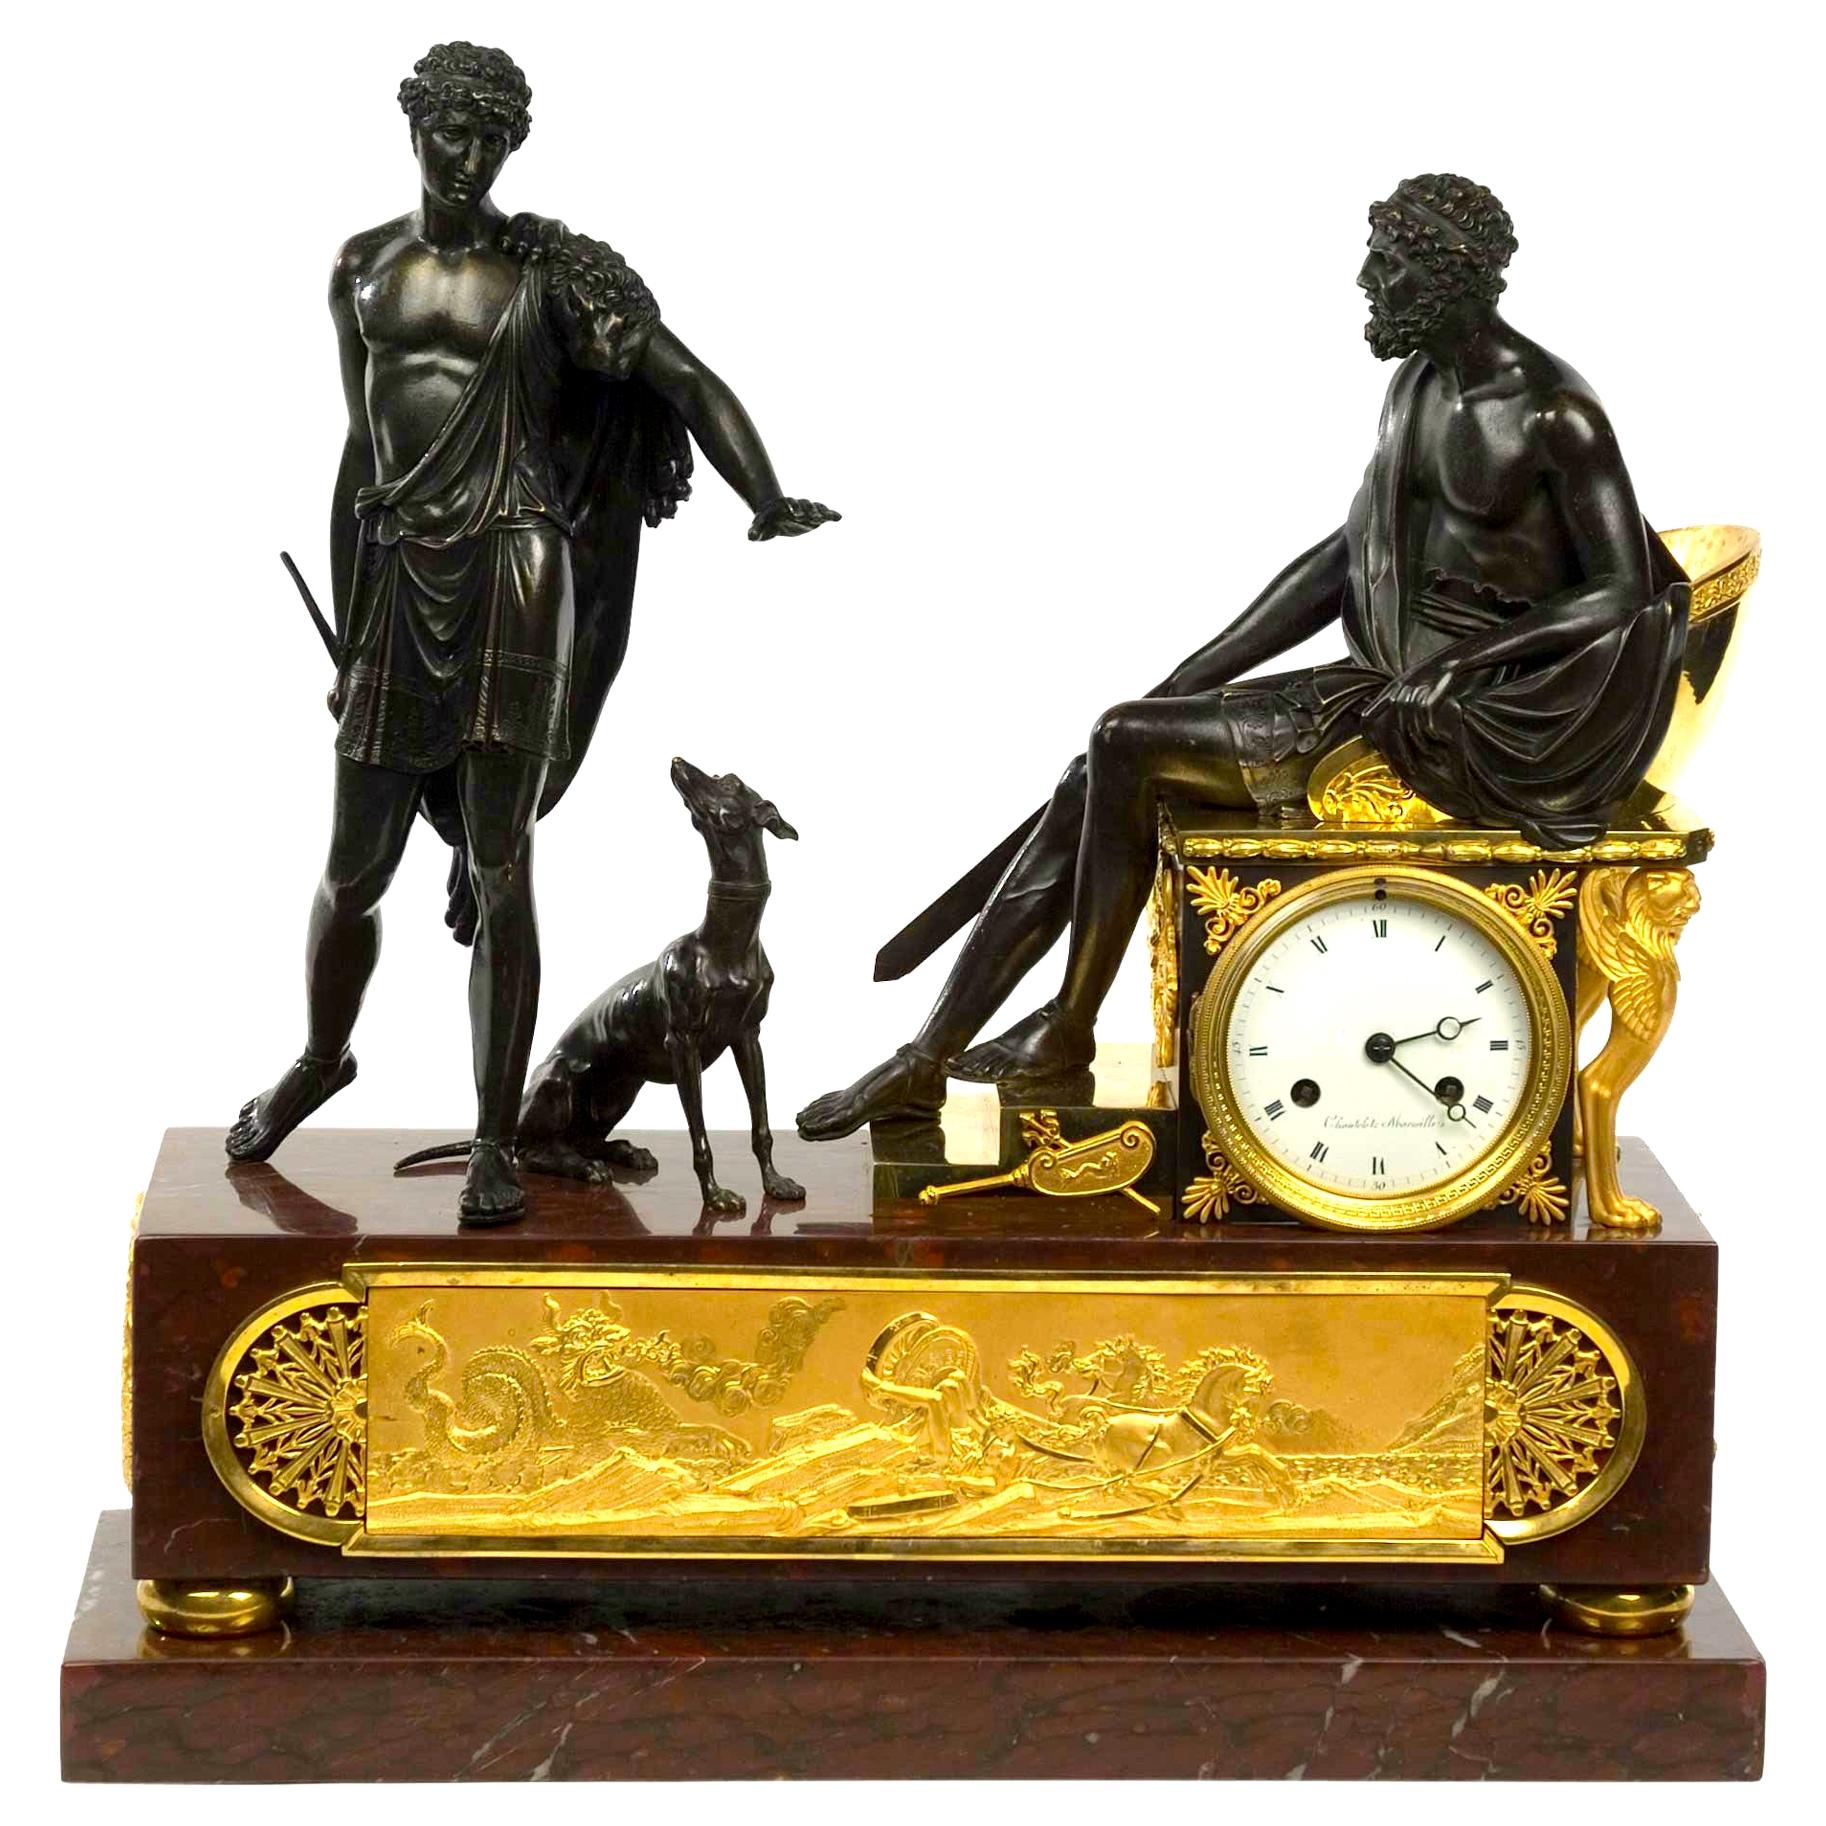 French Empire Figurative Clock Paying Homage to Hippolytus and Theseus